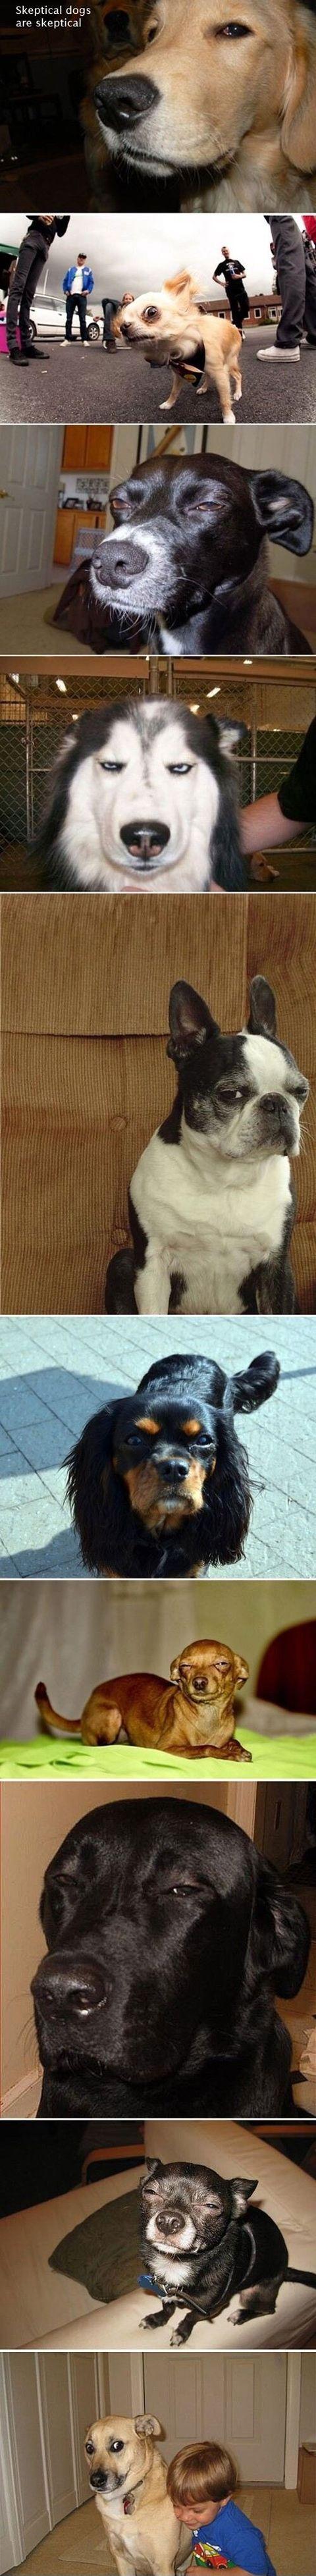 Skeptical dogs are skeptical.